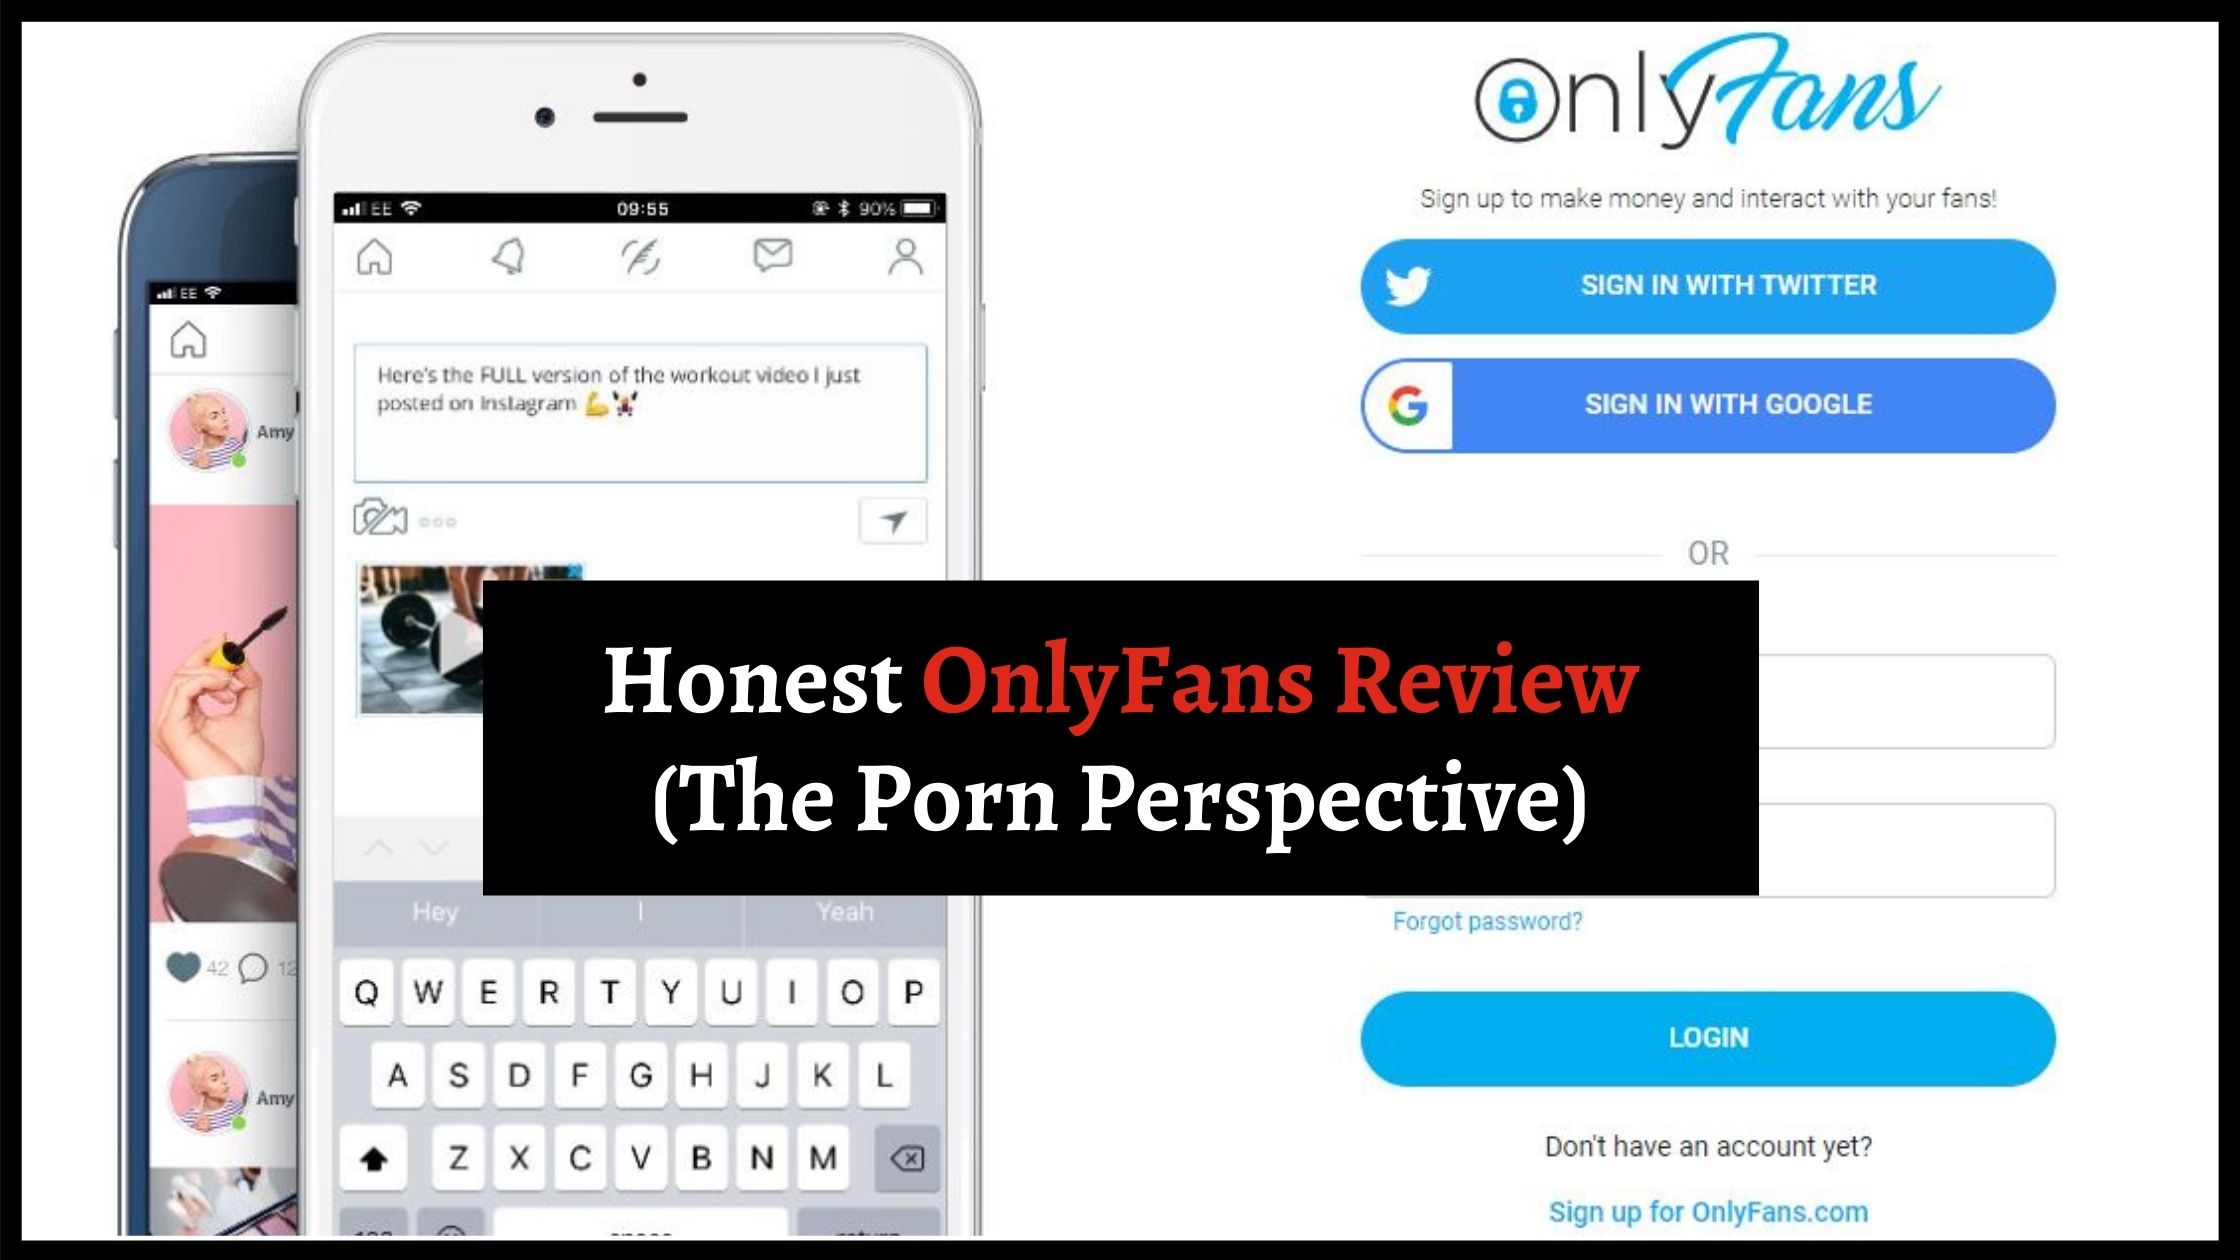 Only fans app reviews